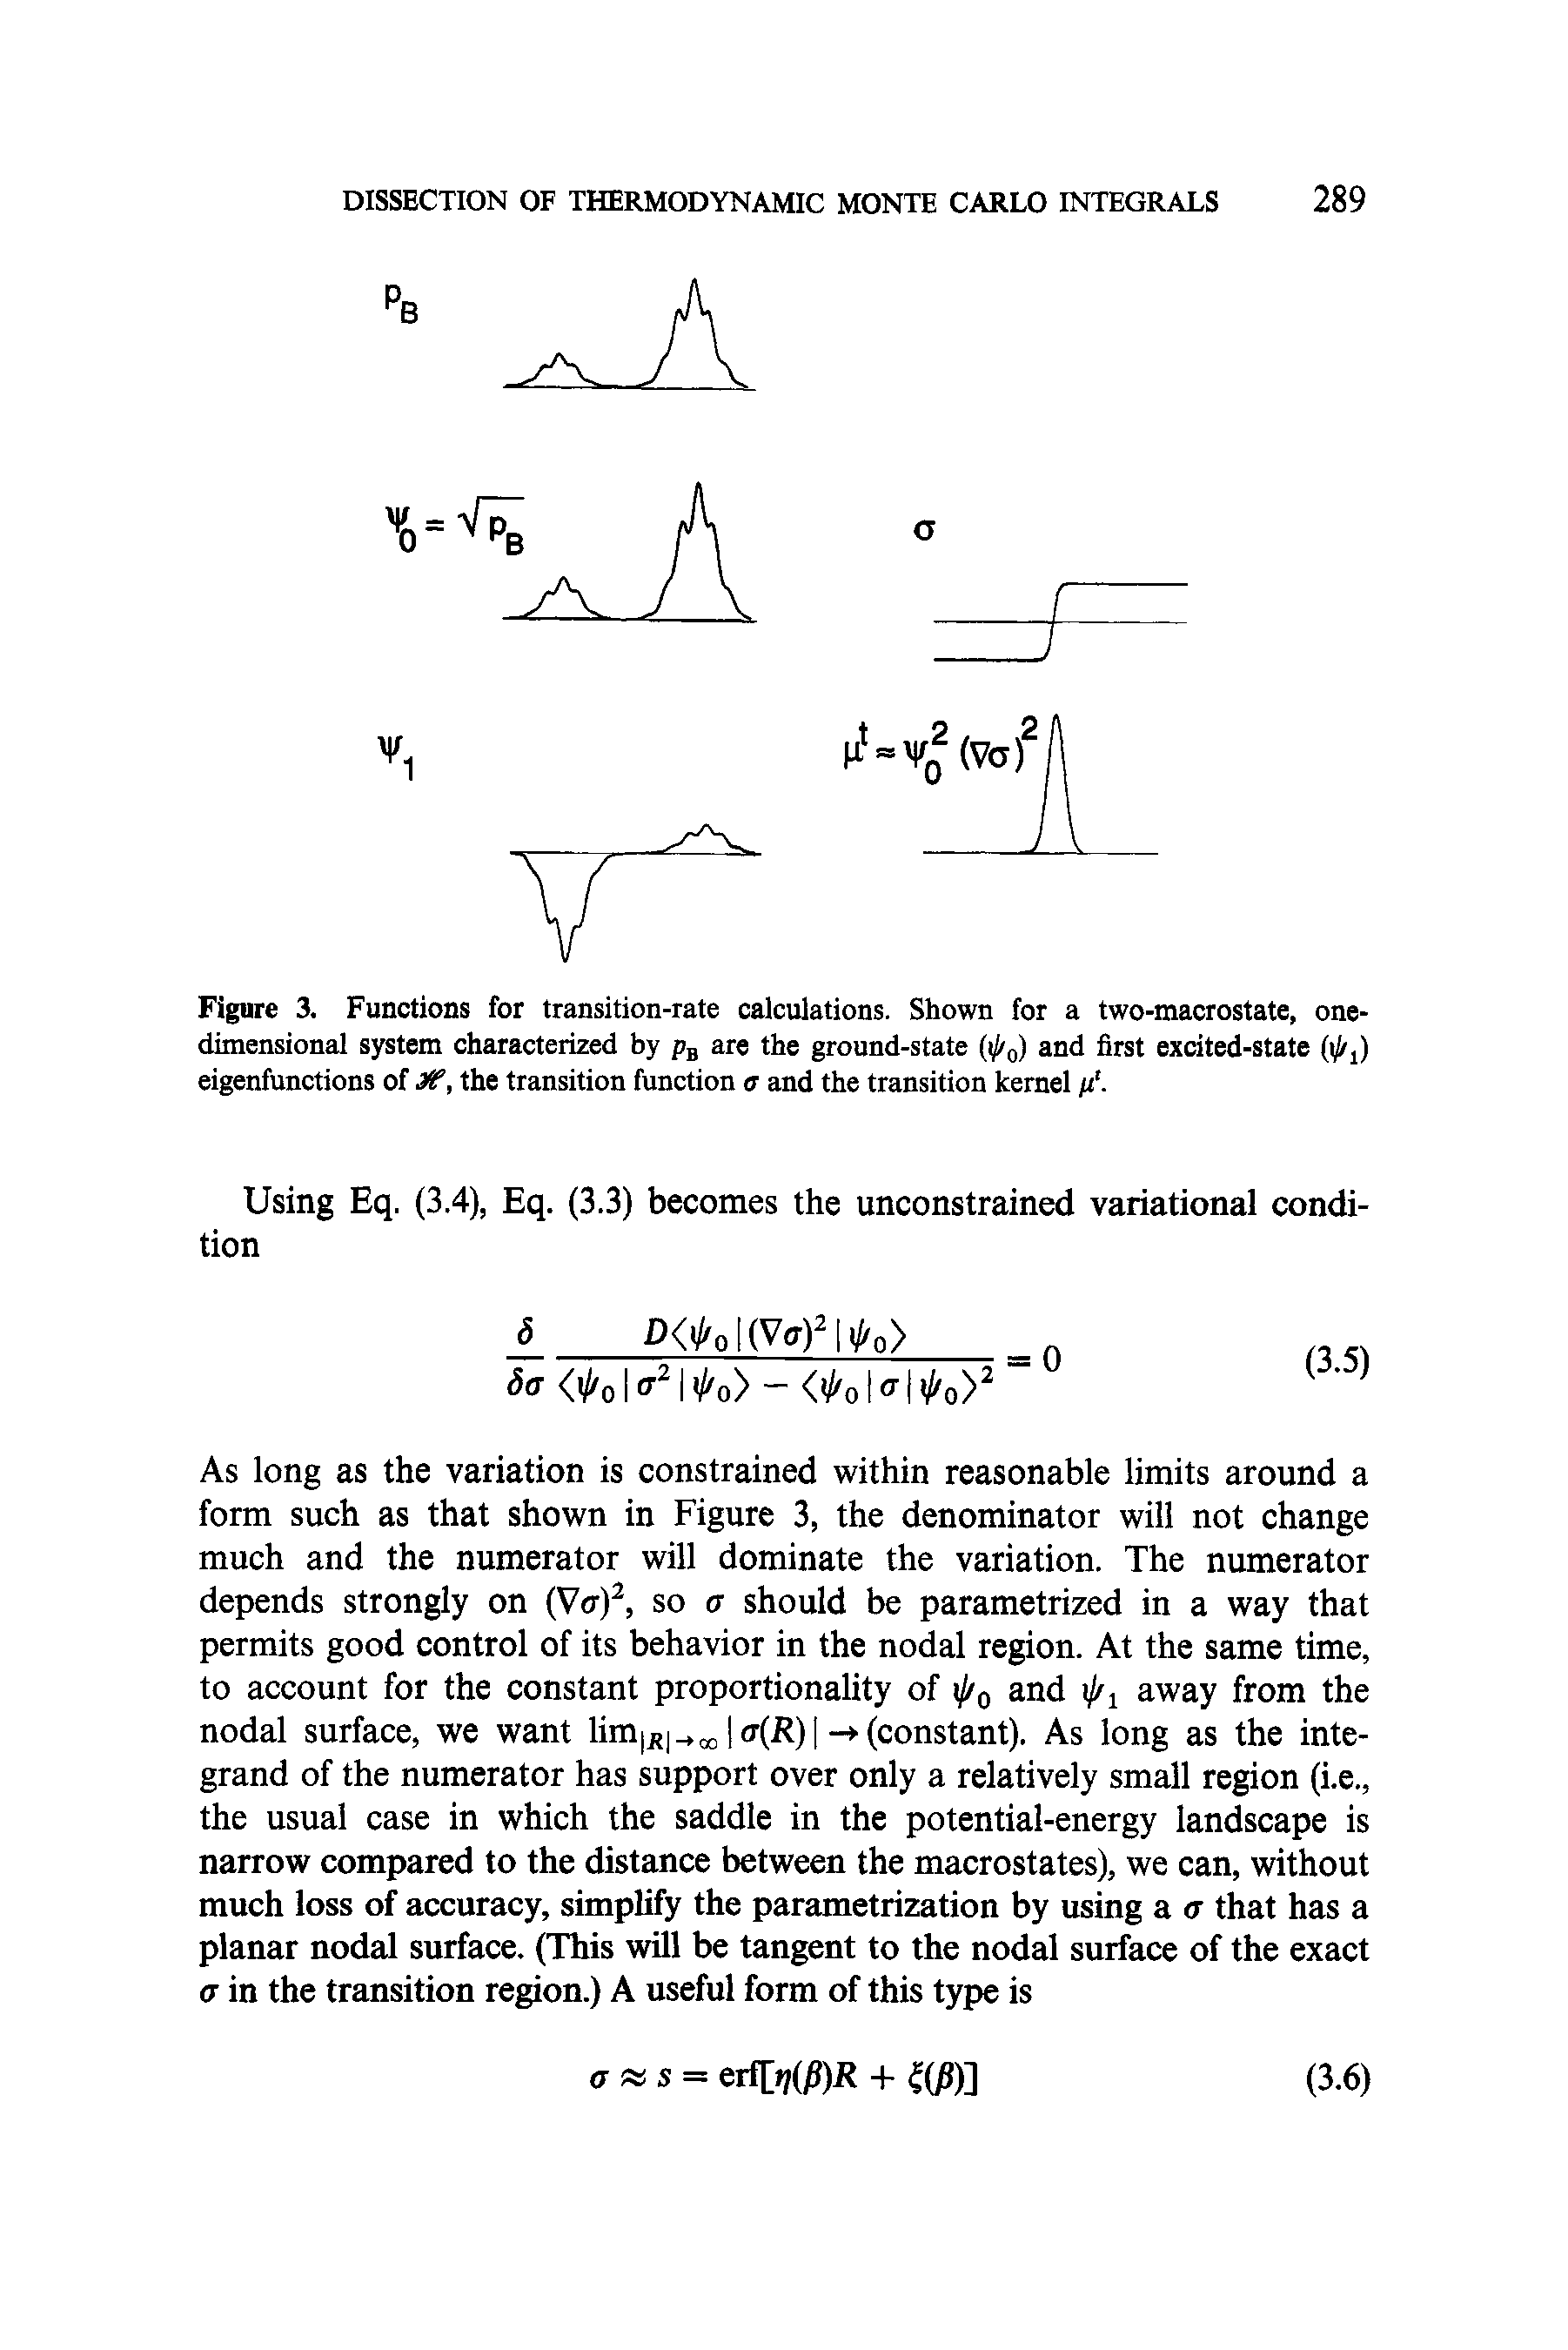 Figure 3. Functions for transition-rate calculations. Shown for a two-macrostate, onedimensional system characterized by pB are the ground-state ( 0) and first excited-state eigenfunctions of X, the transition function and the transition kernel p .